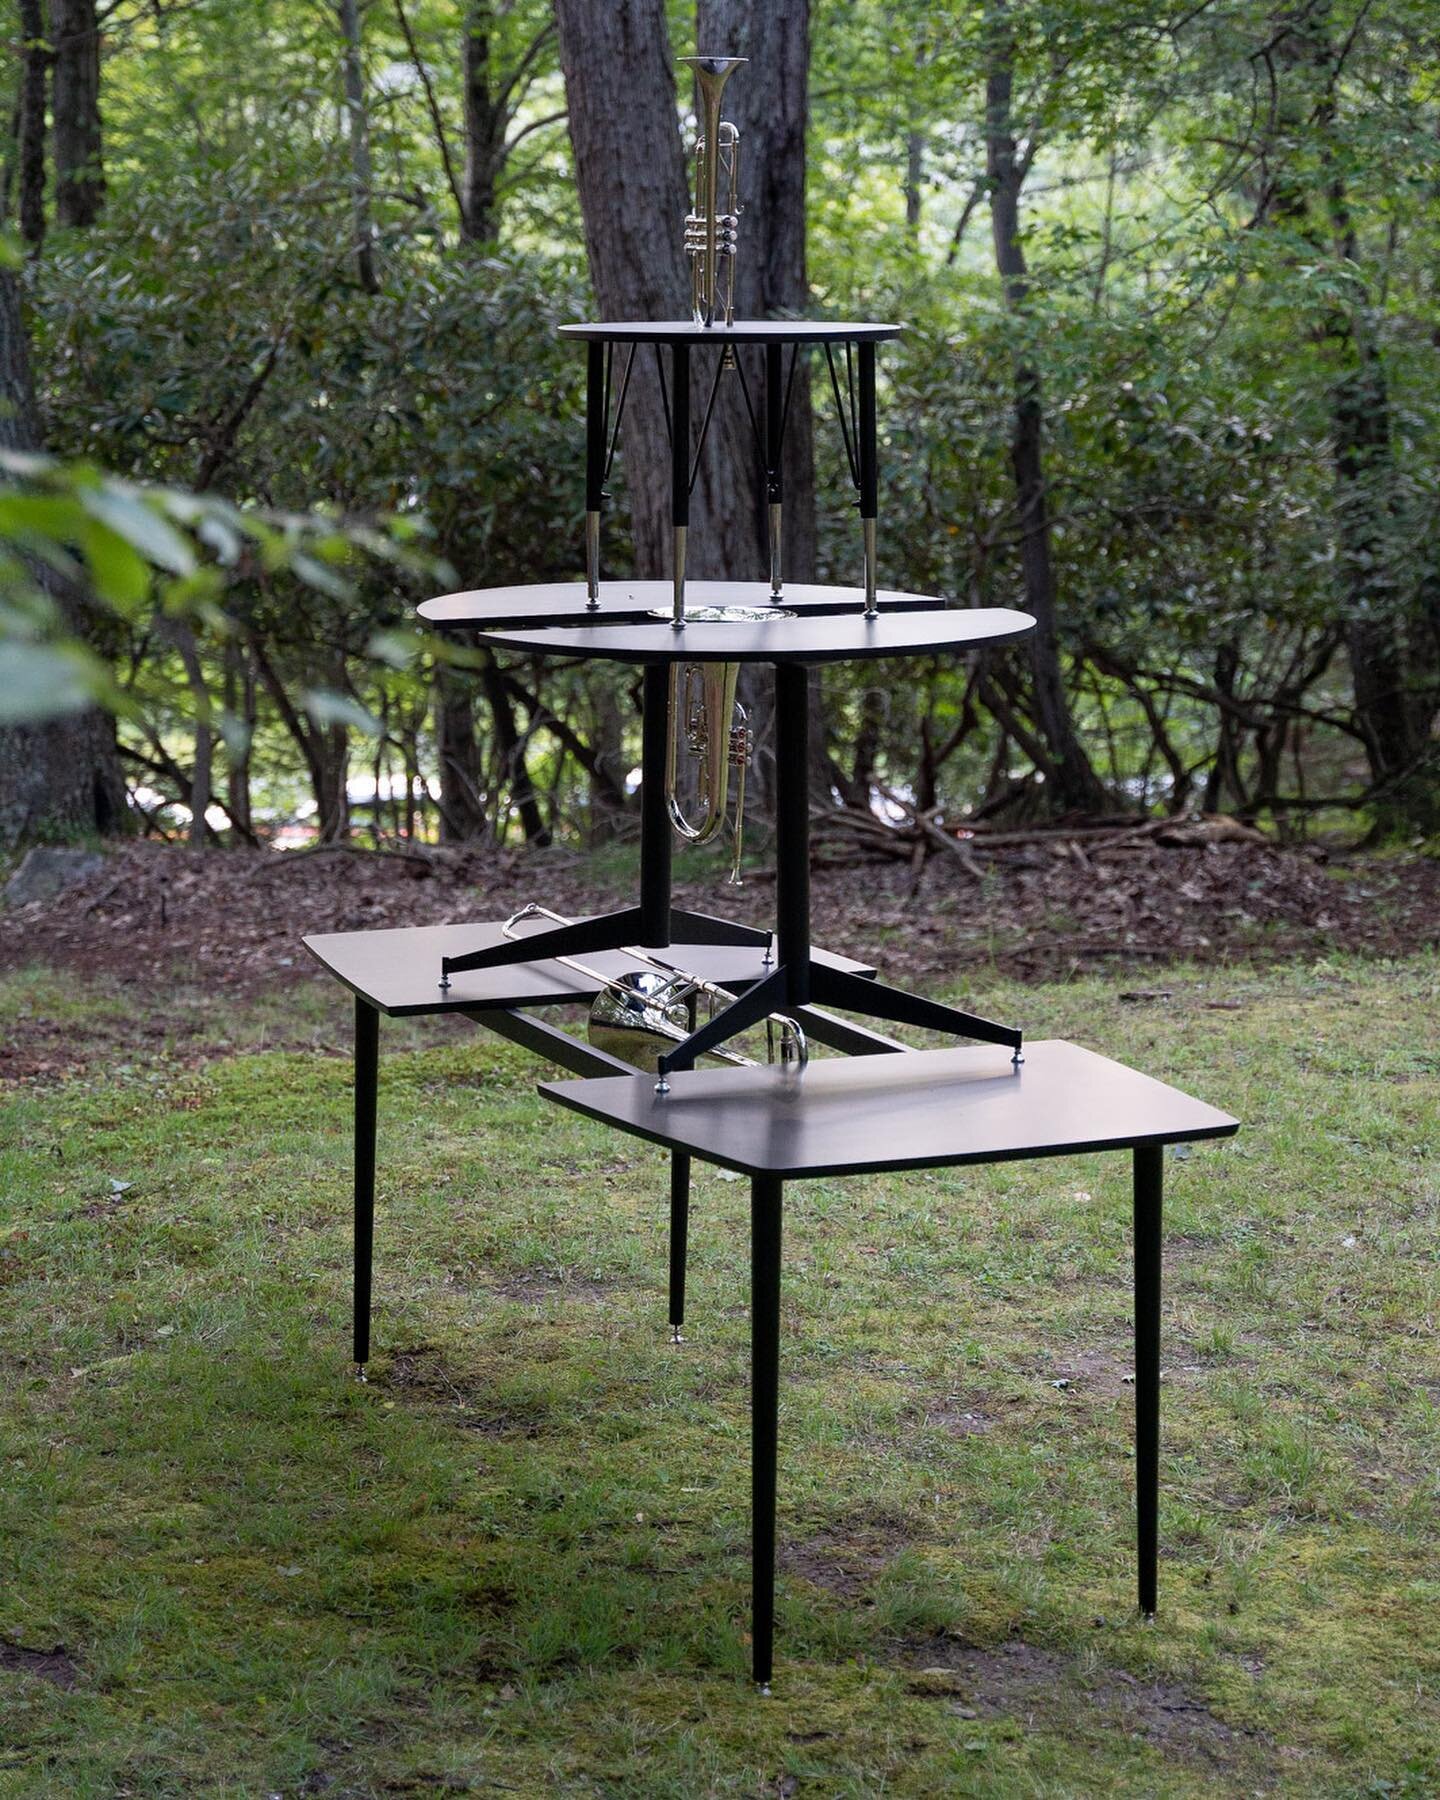 Christine Rebhuhn&rsquo;s sculpture stood on the left end of The Clearing. The slick black tables appeared alien against the wooded backdrop while the silver chrome instruments (and mouth-piece-like table feet) mirrored their surroundings.

Christine